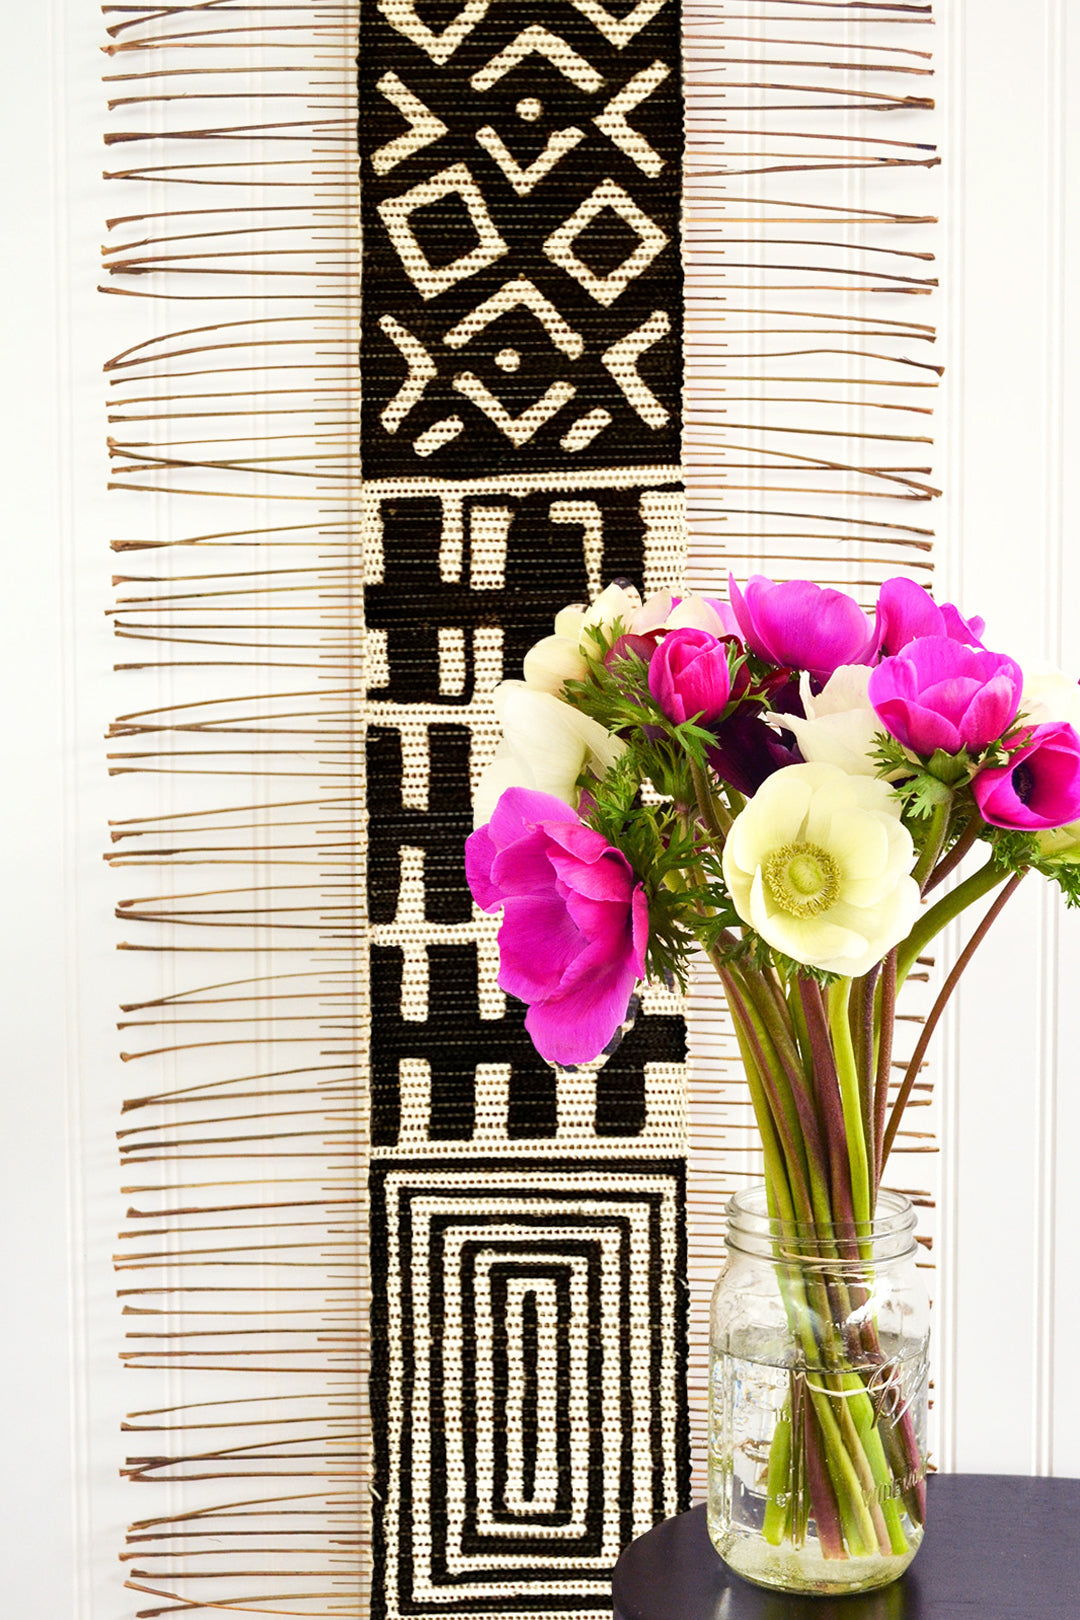 Black & White Mixed Motif Twig Table Runner